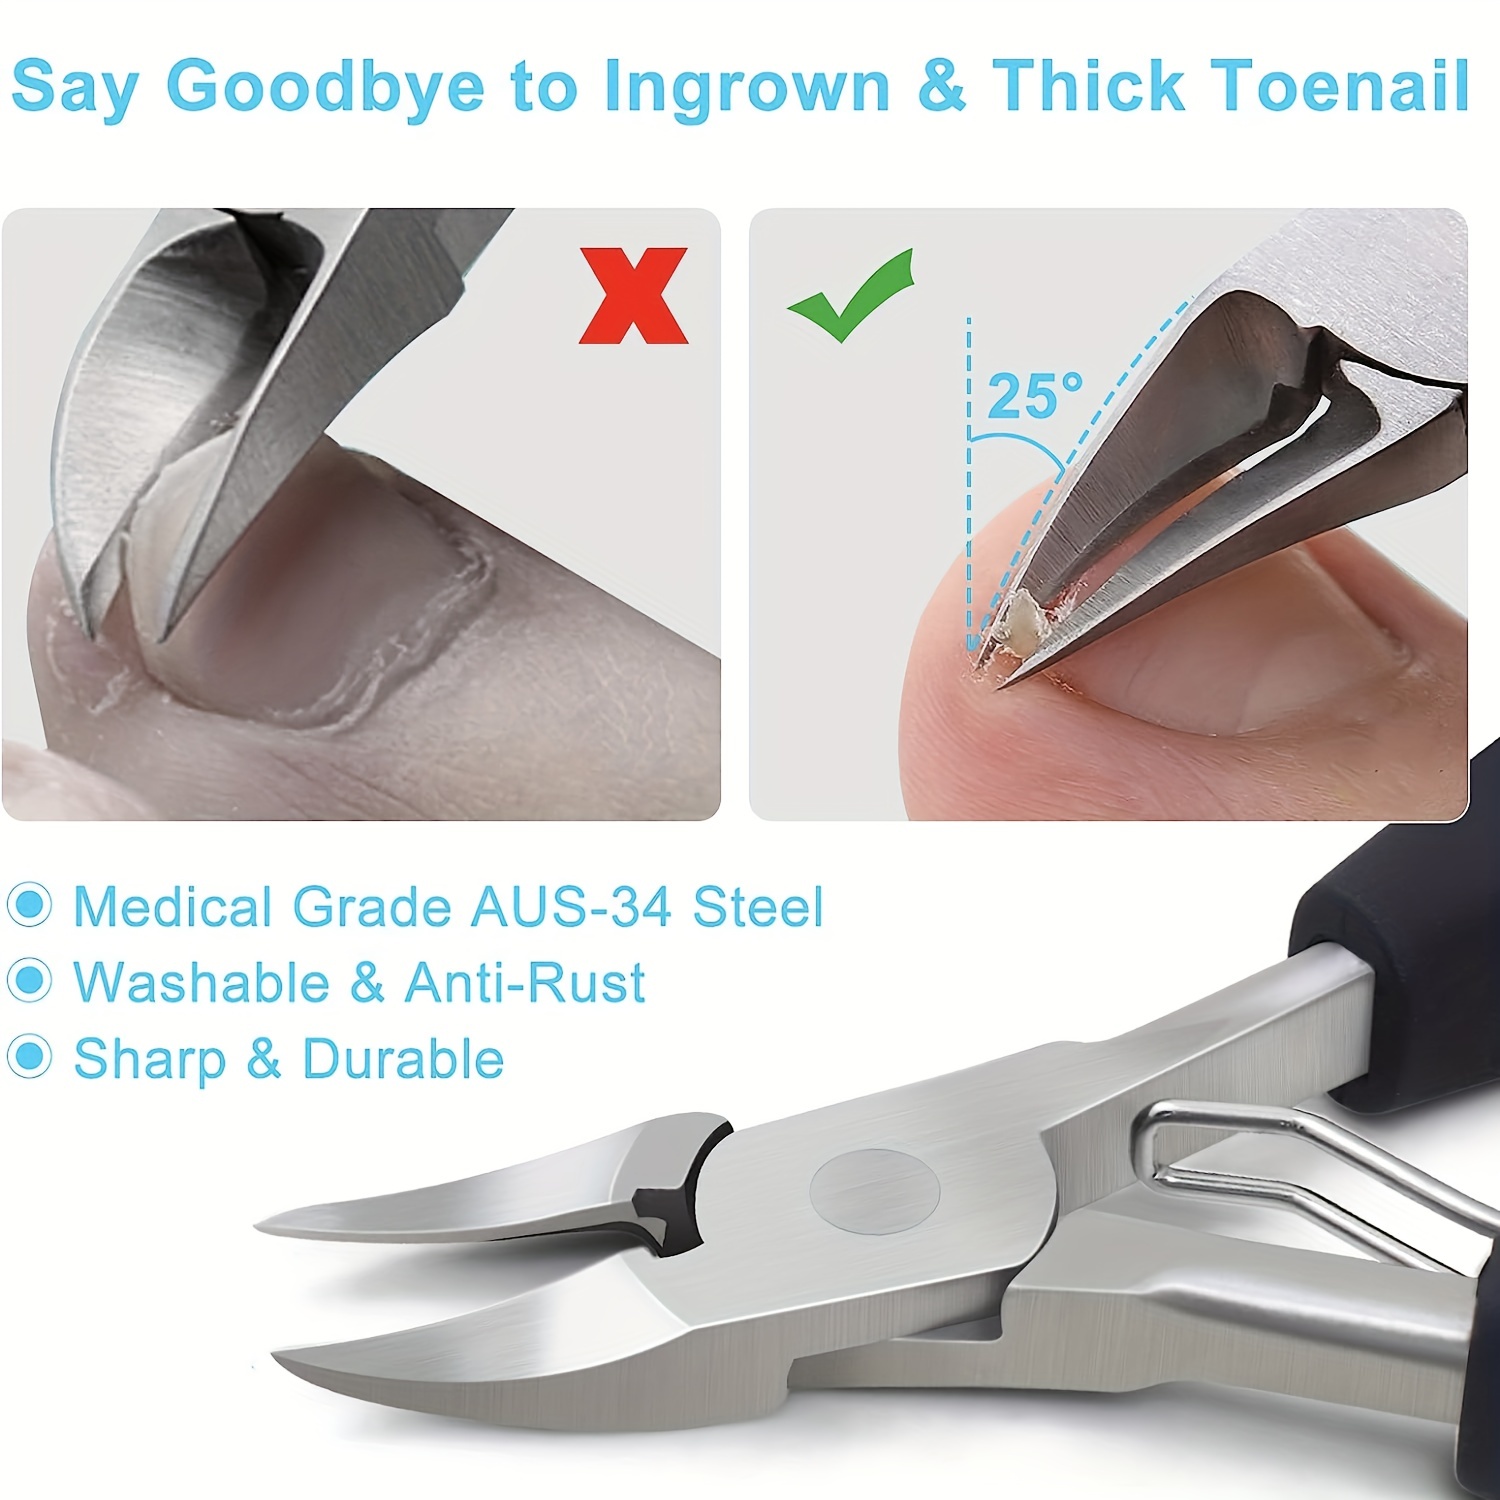 Professional Ingrown or Thick Toe Nail Clippers for Men & Seniors